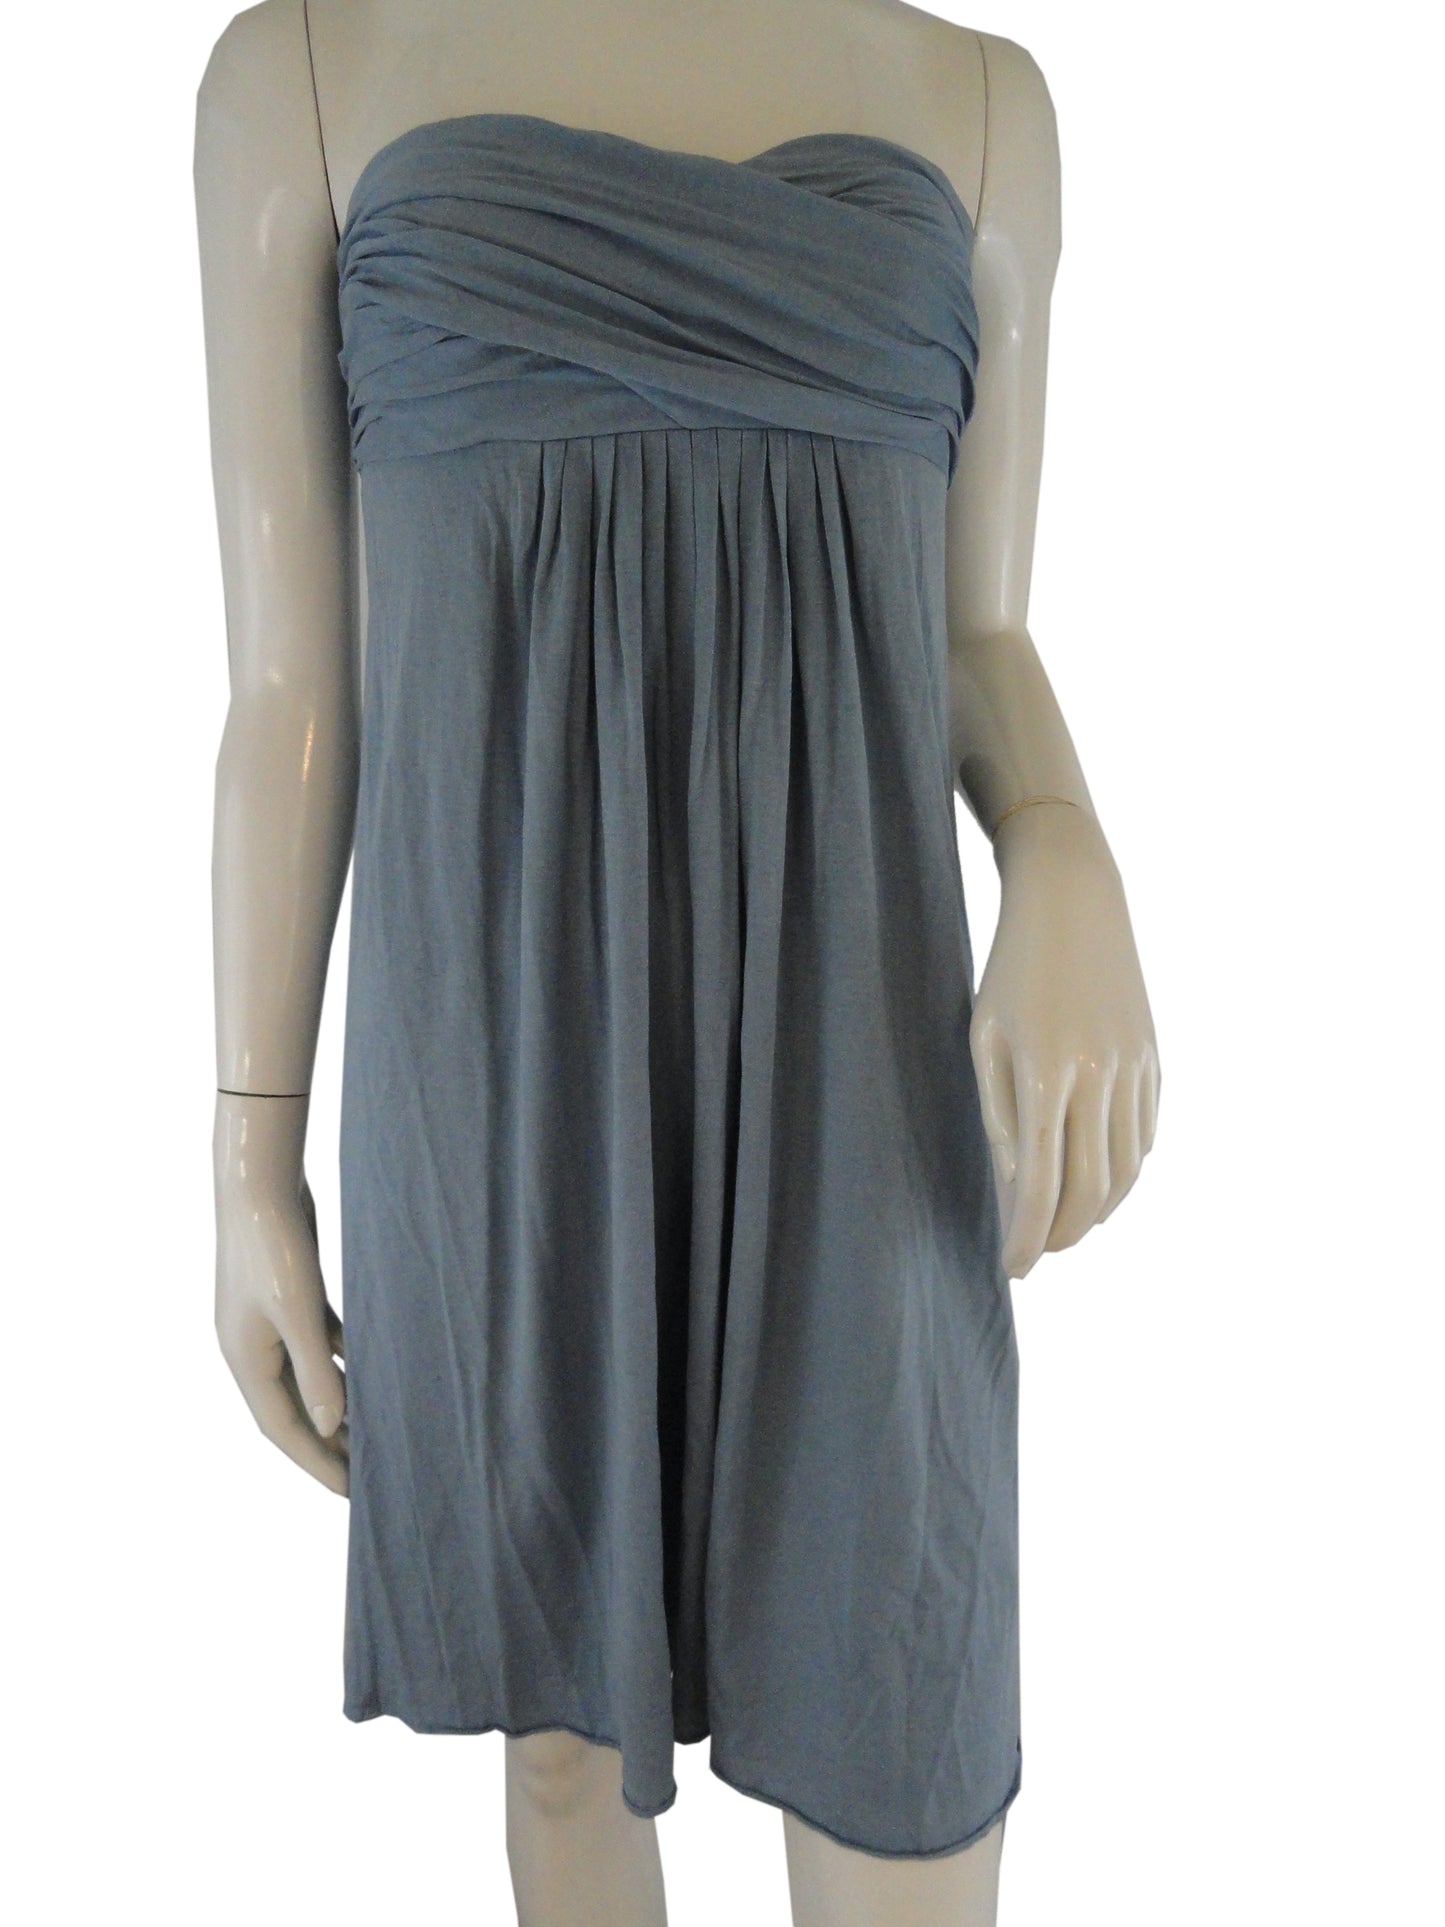 Load image into Gallery viewer, Banana Republic Dress Strapless Grey Blue Size Small SKU 001003
